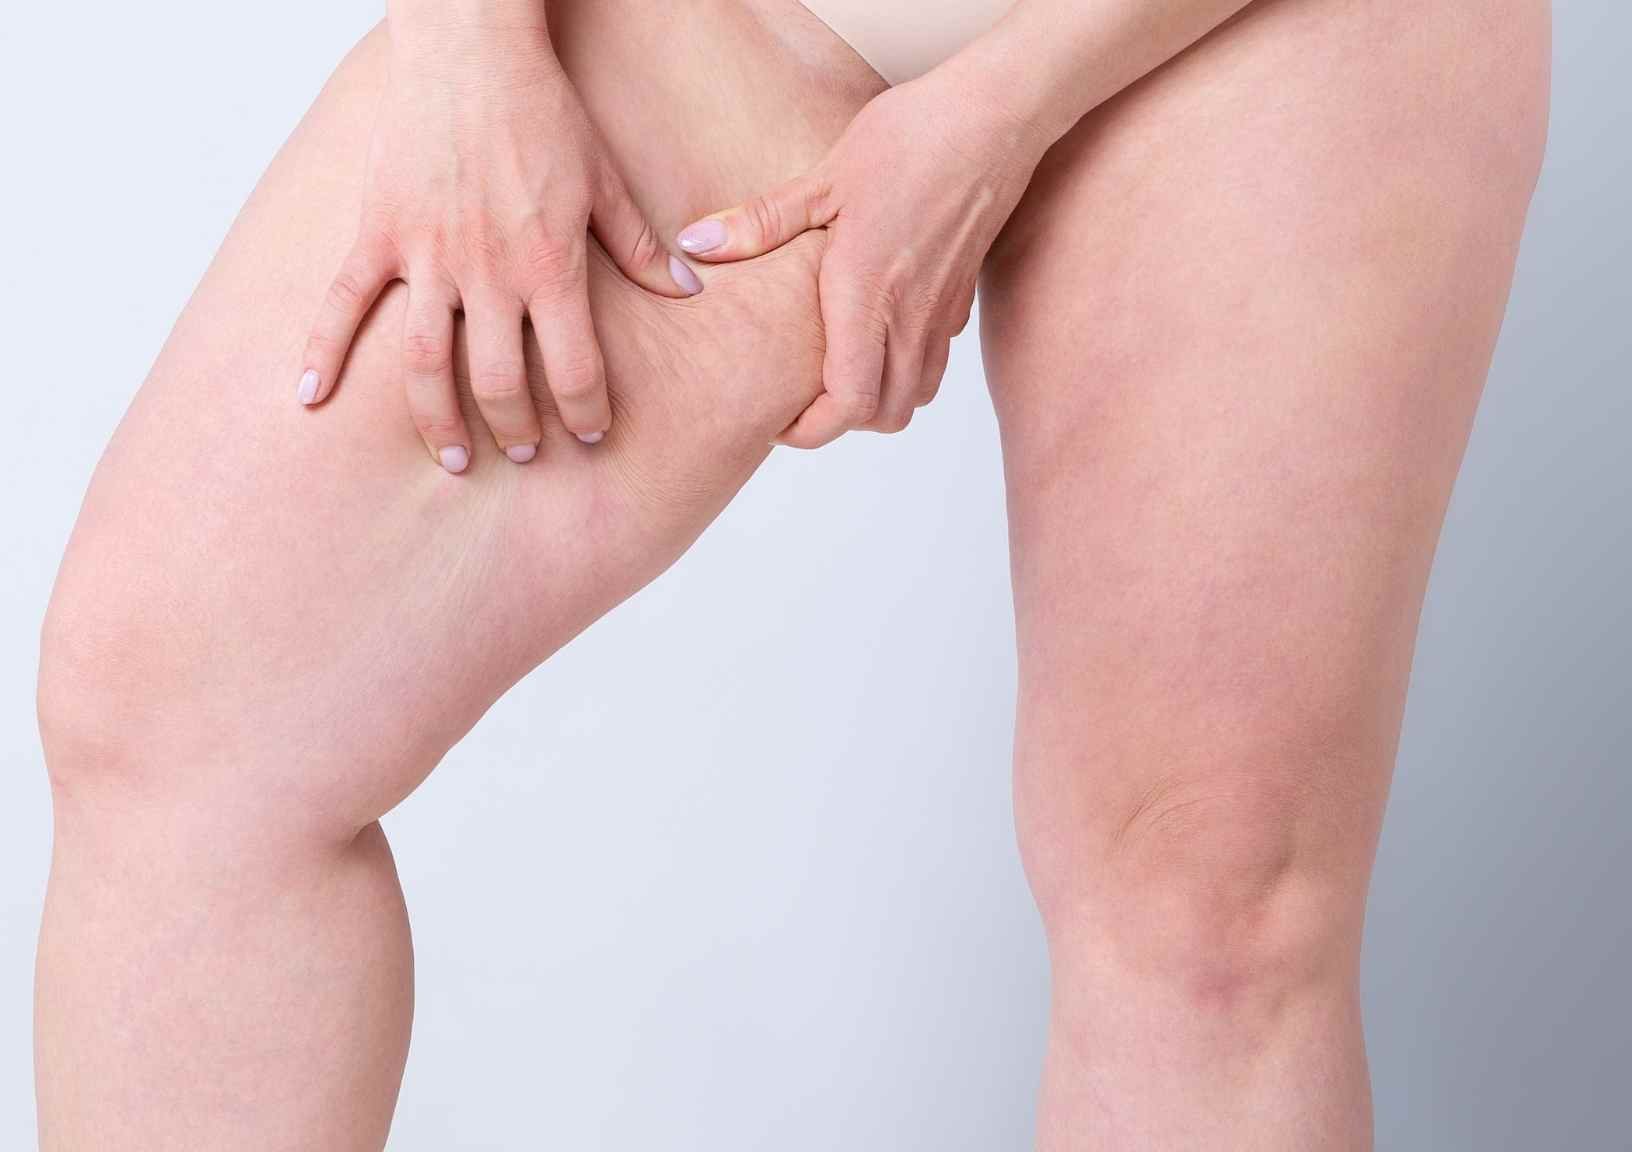 How To Prevent Inner Thigh Chafing: Female Relief Tips